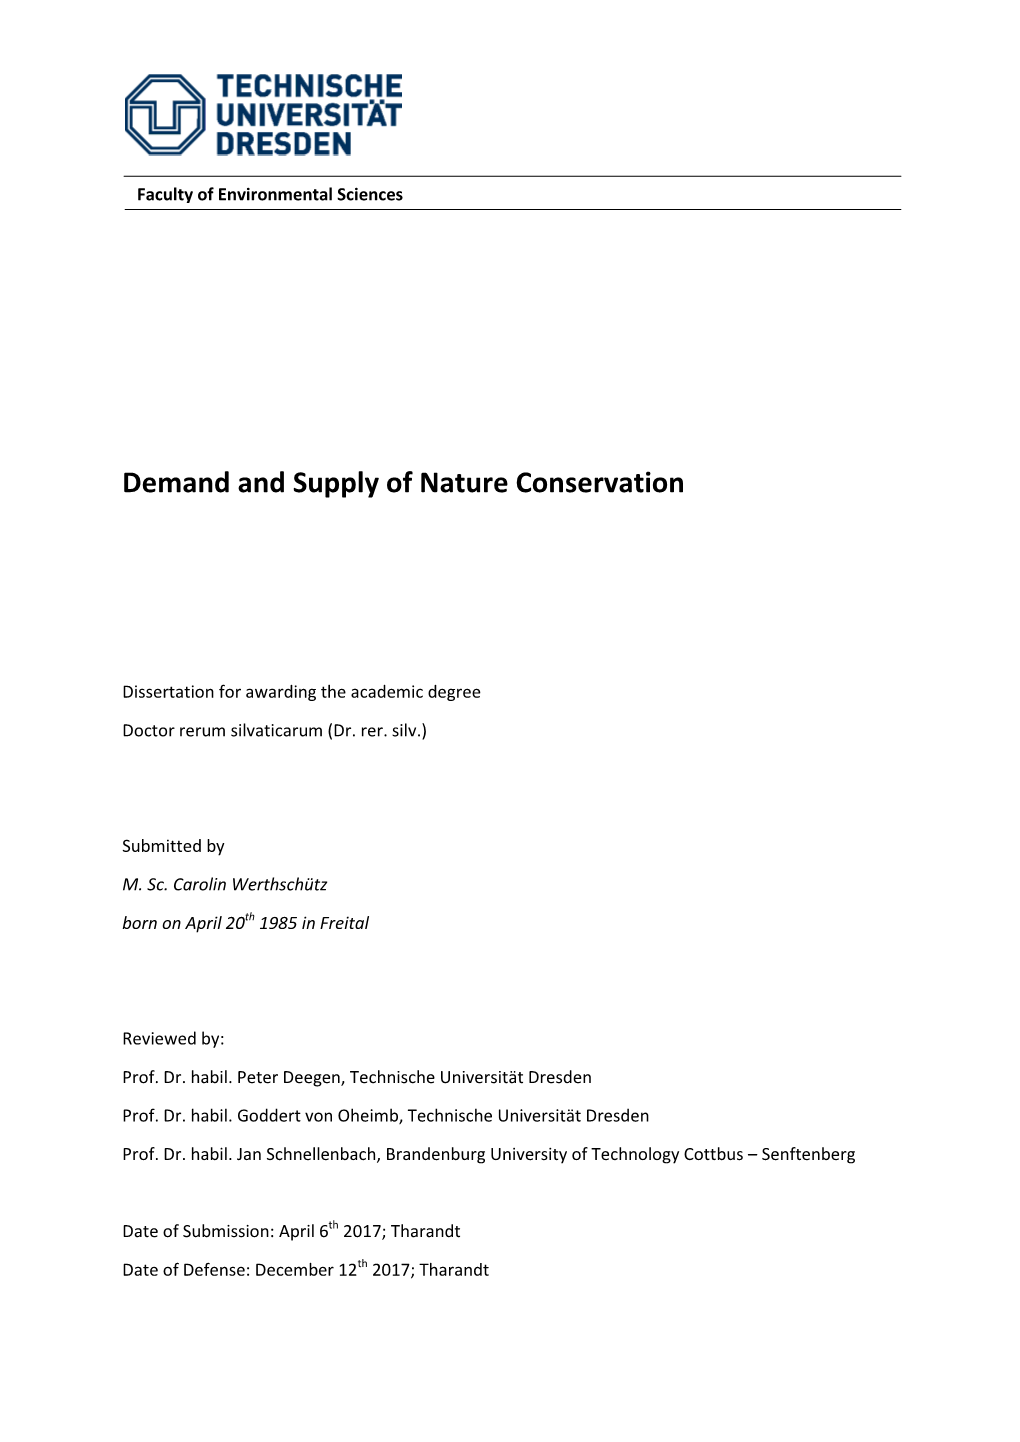 Demand and Supply of Nature Conservation